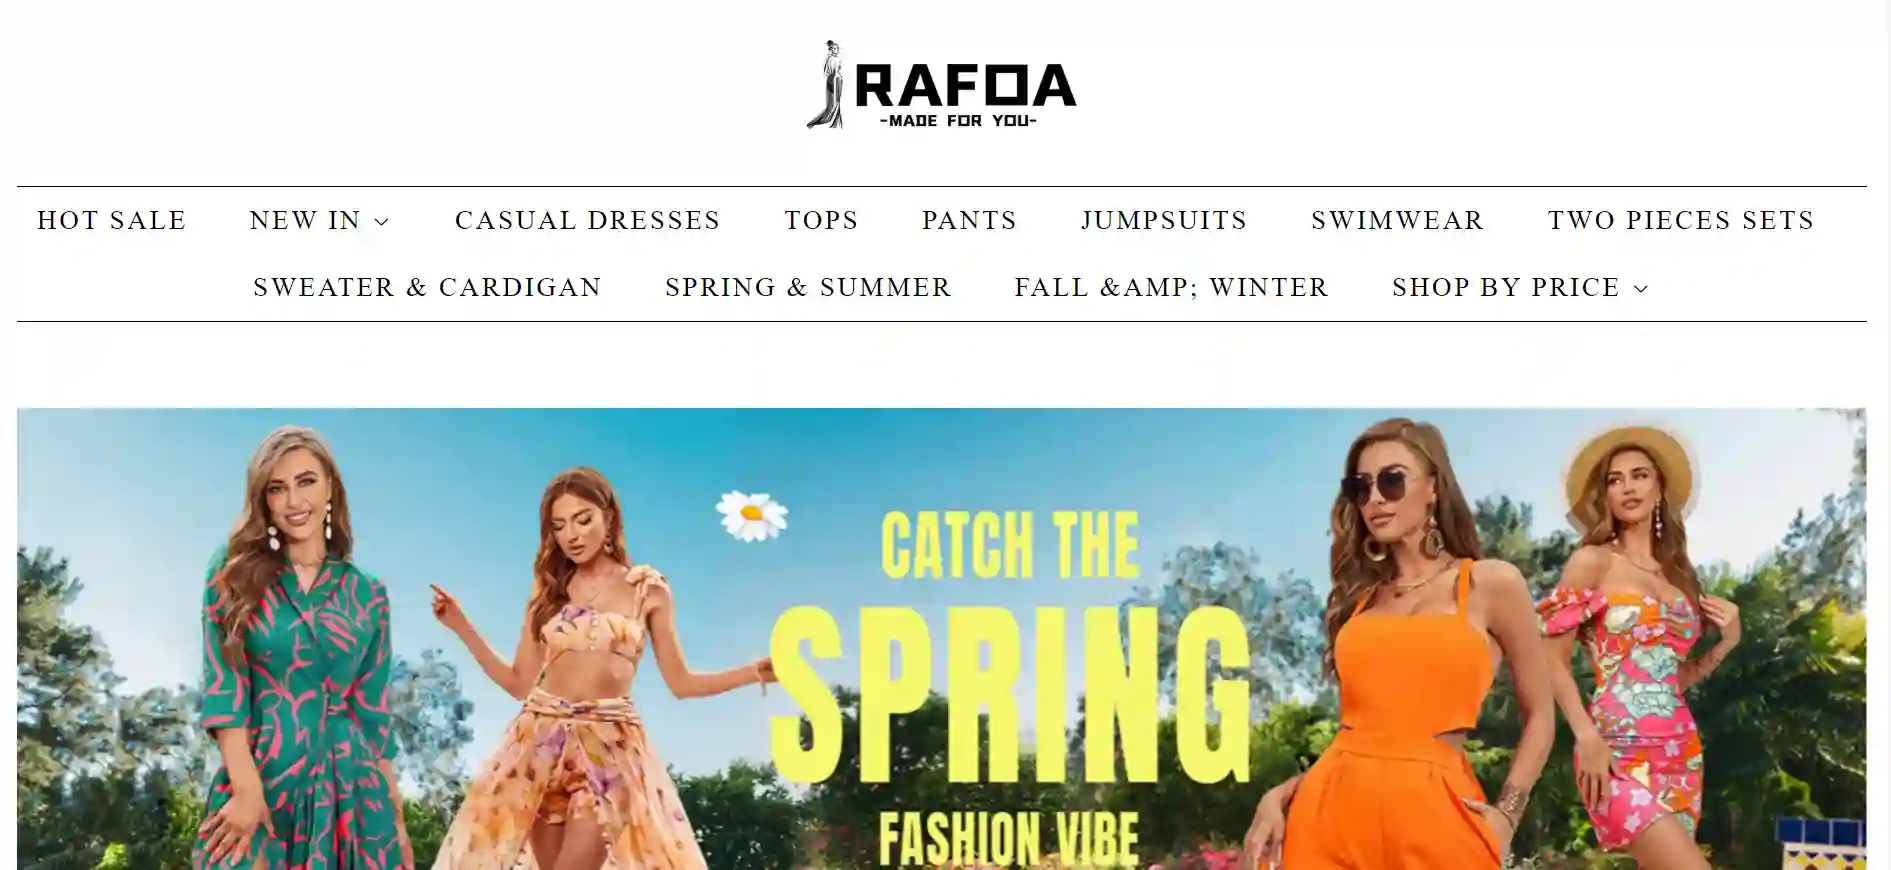 You are currently viewing Rafoa Clothing Reviews: Legitimate Brand or Scam?